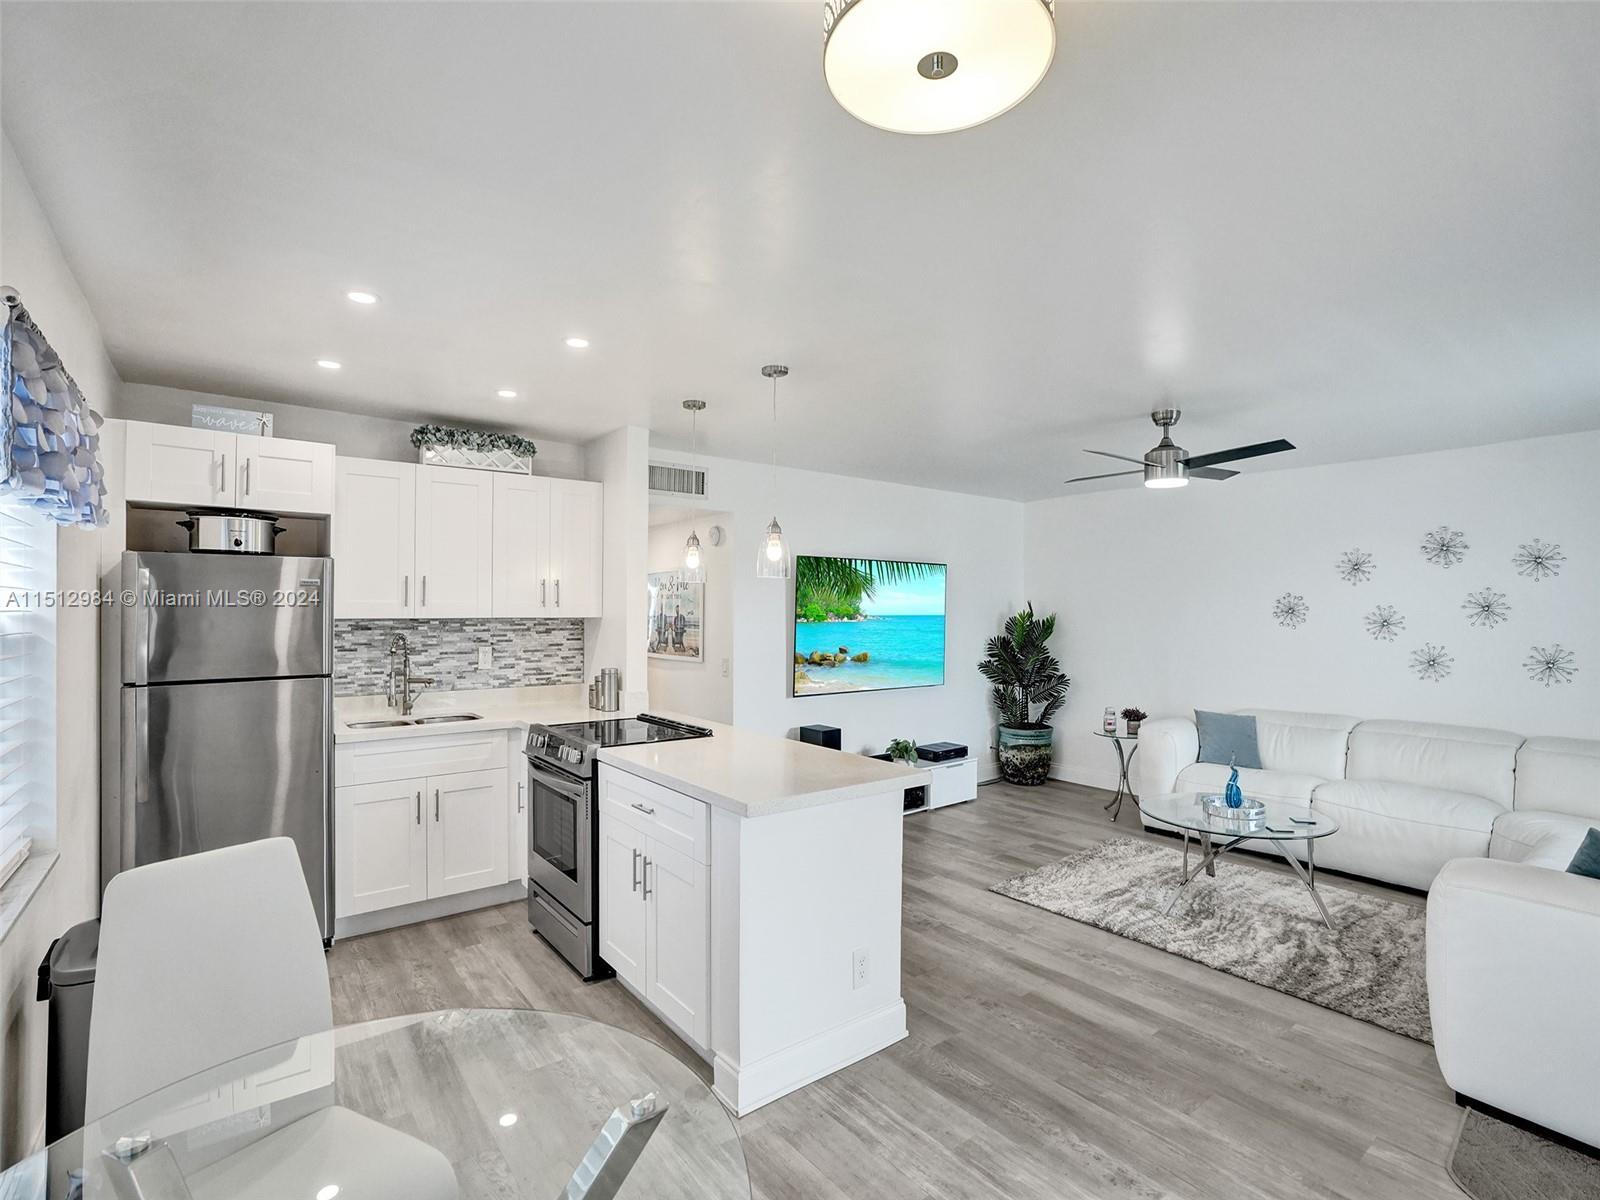 Photo of 181 Normandy D #181 in Delray Beach, FL